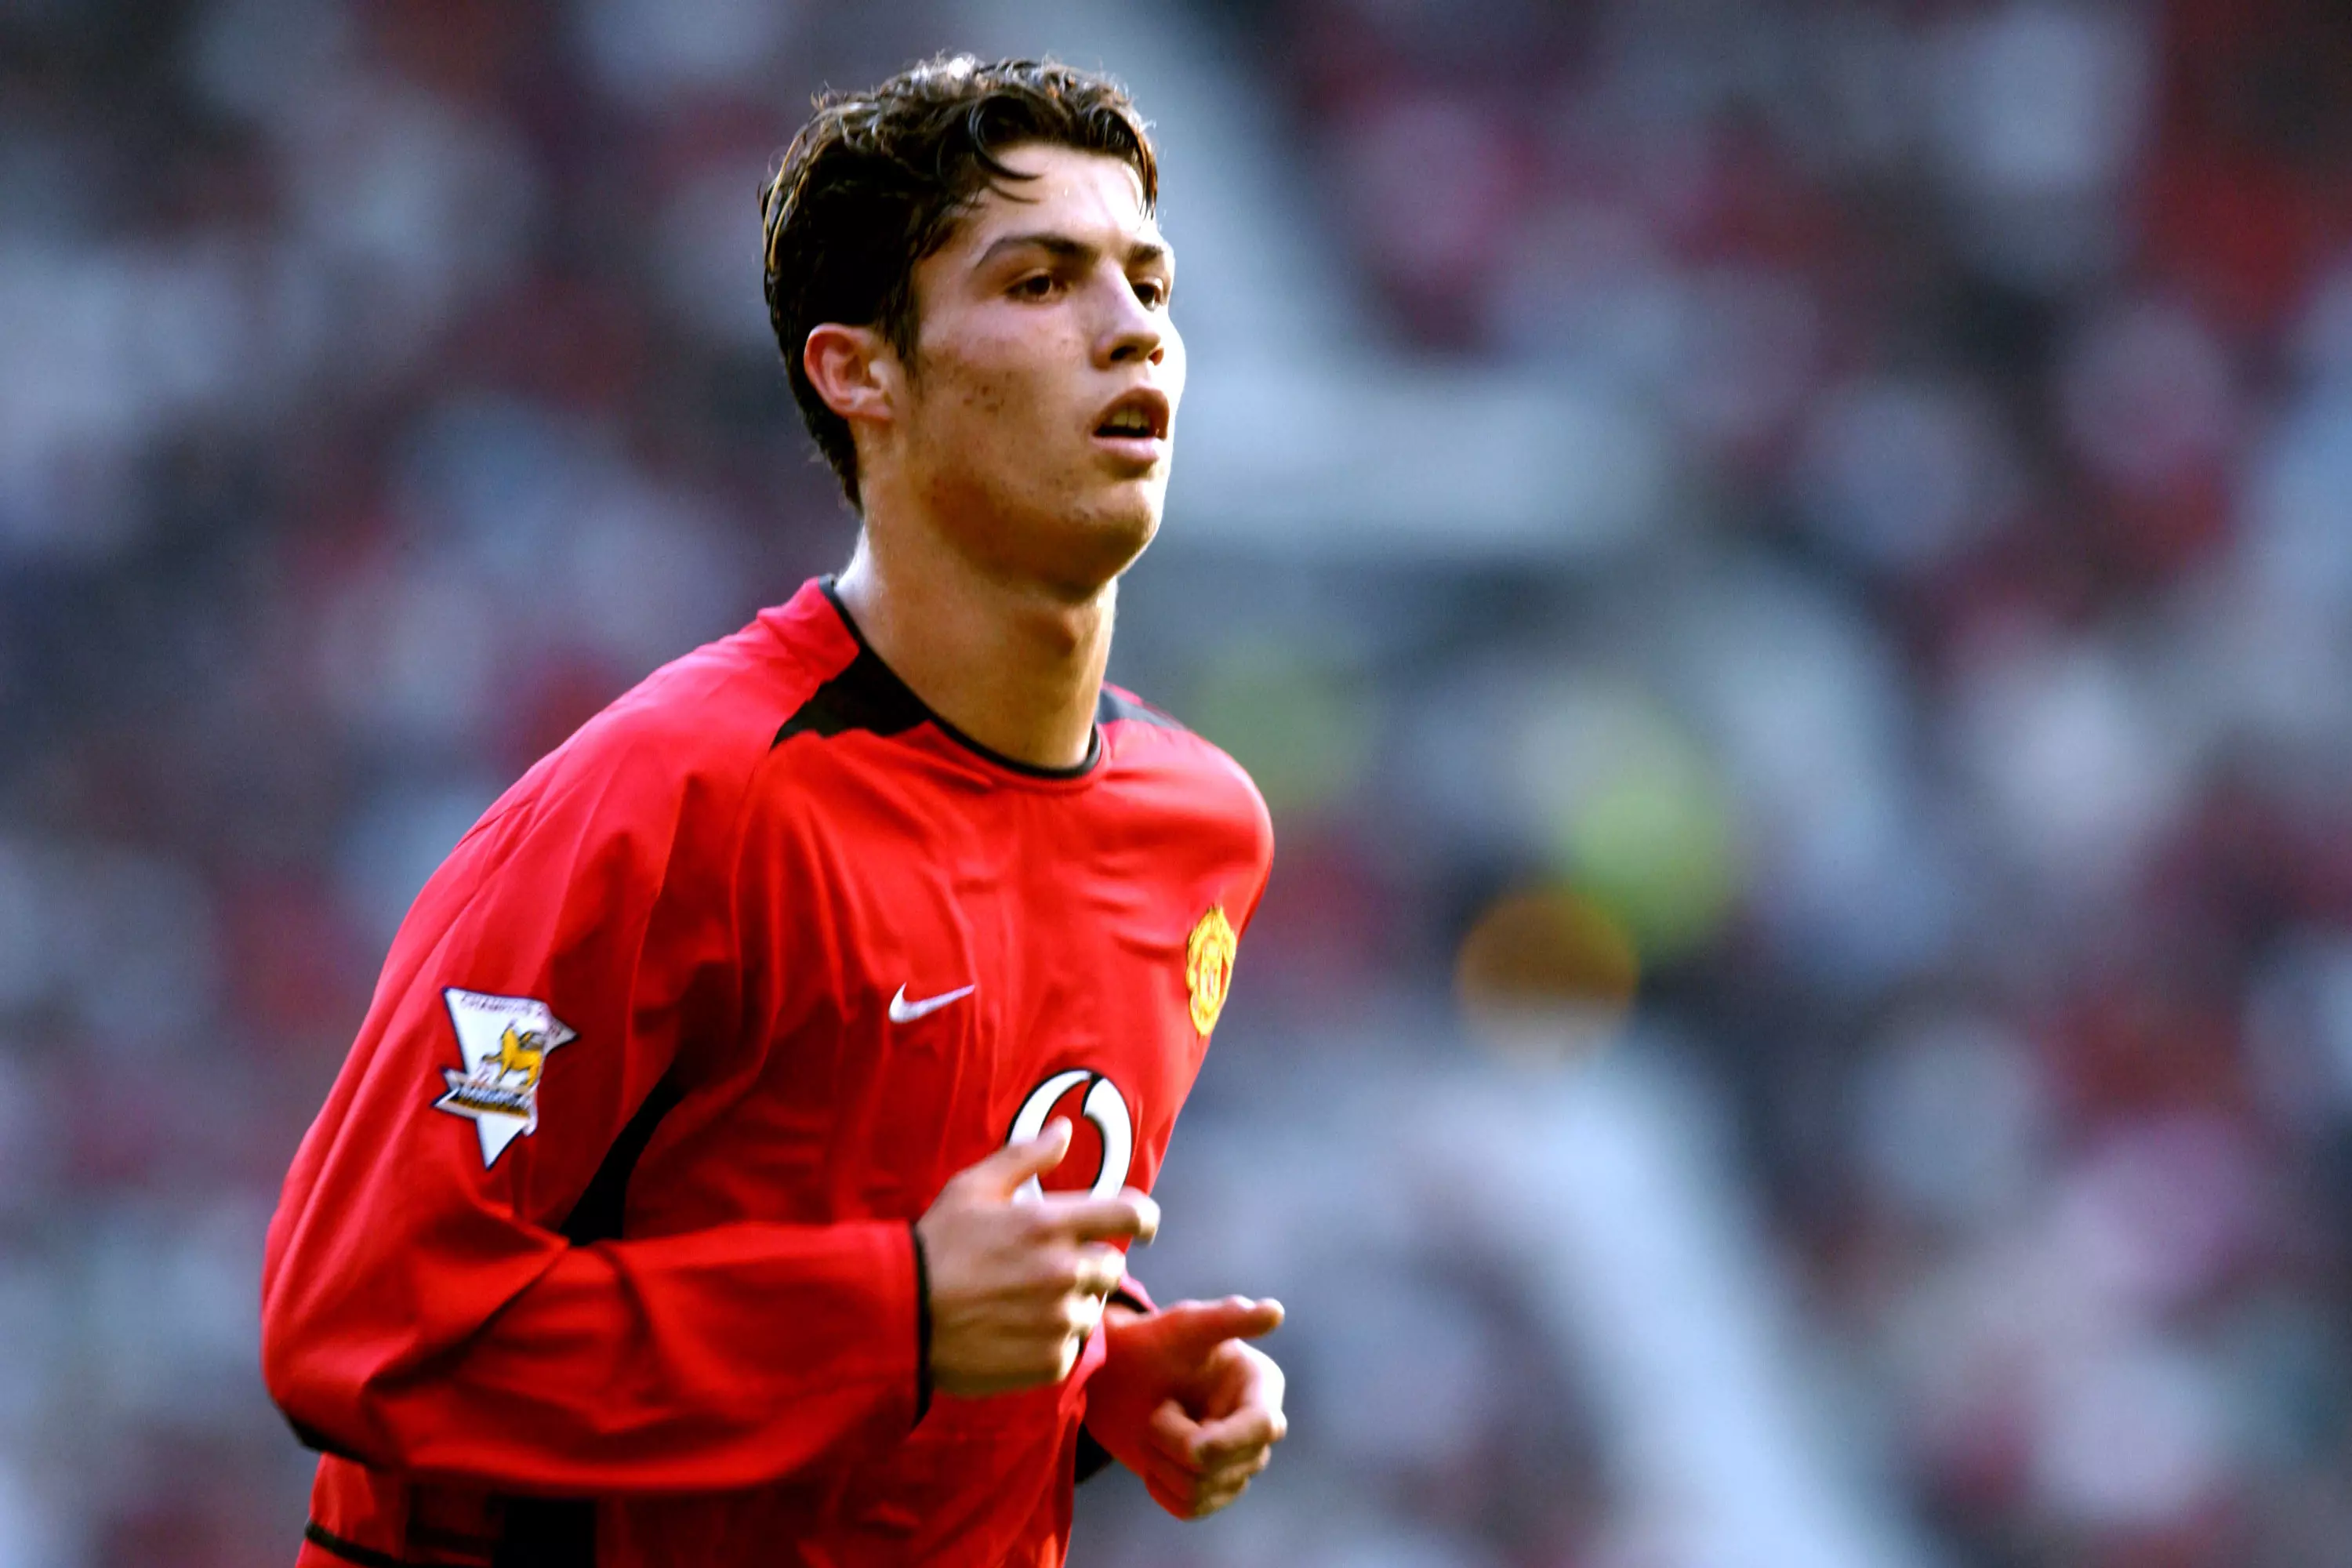 Ronaldo is returning to Old Trafford.